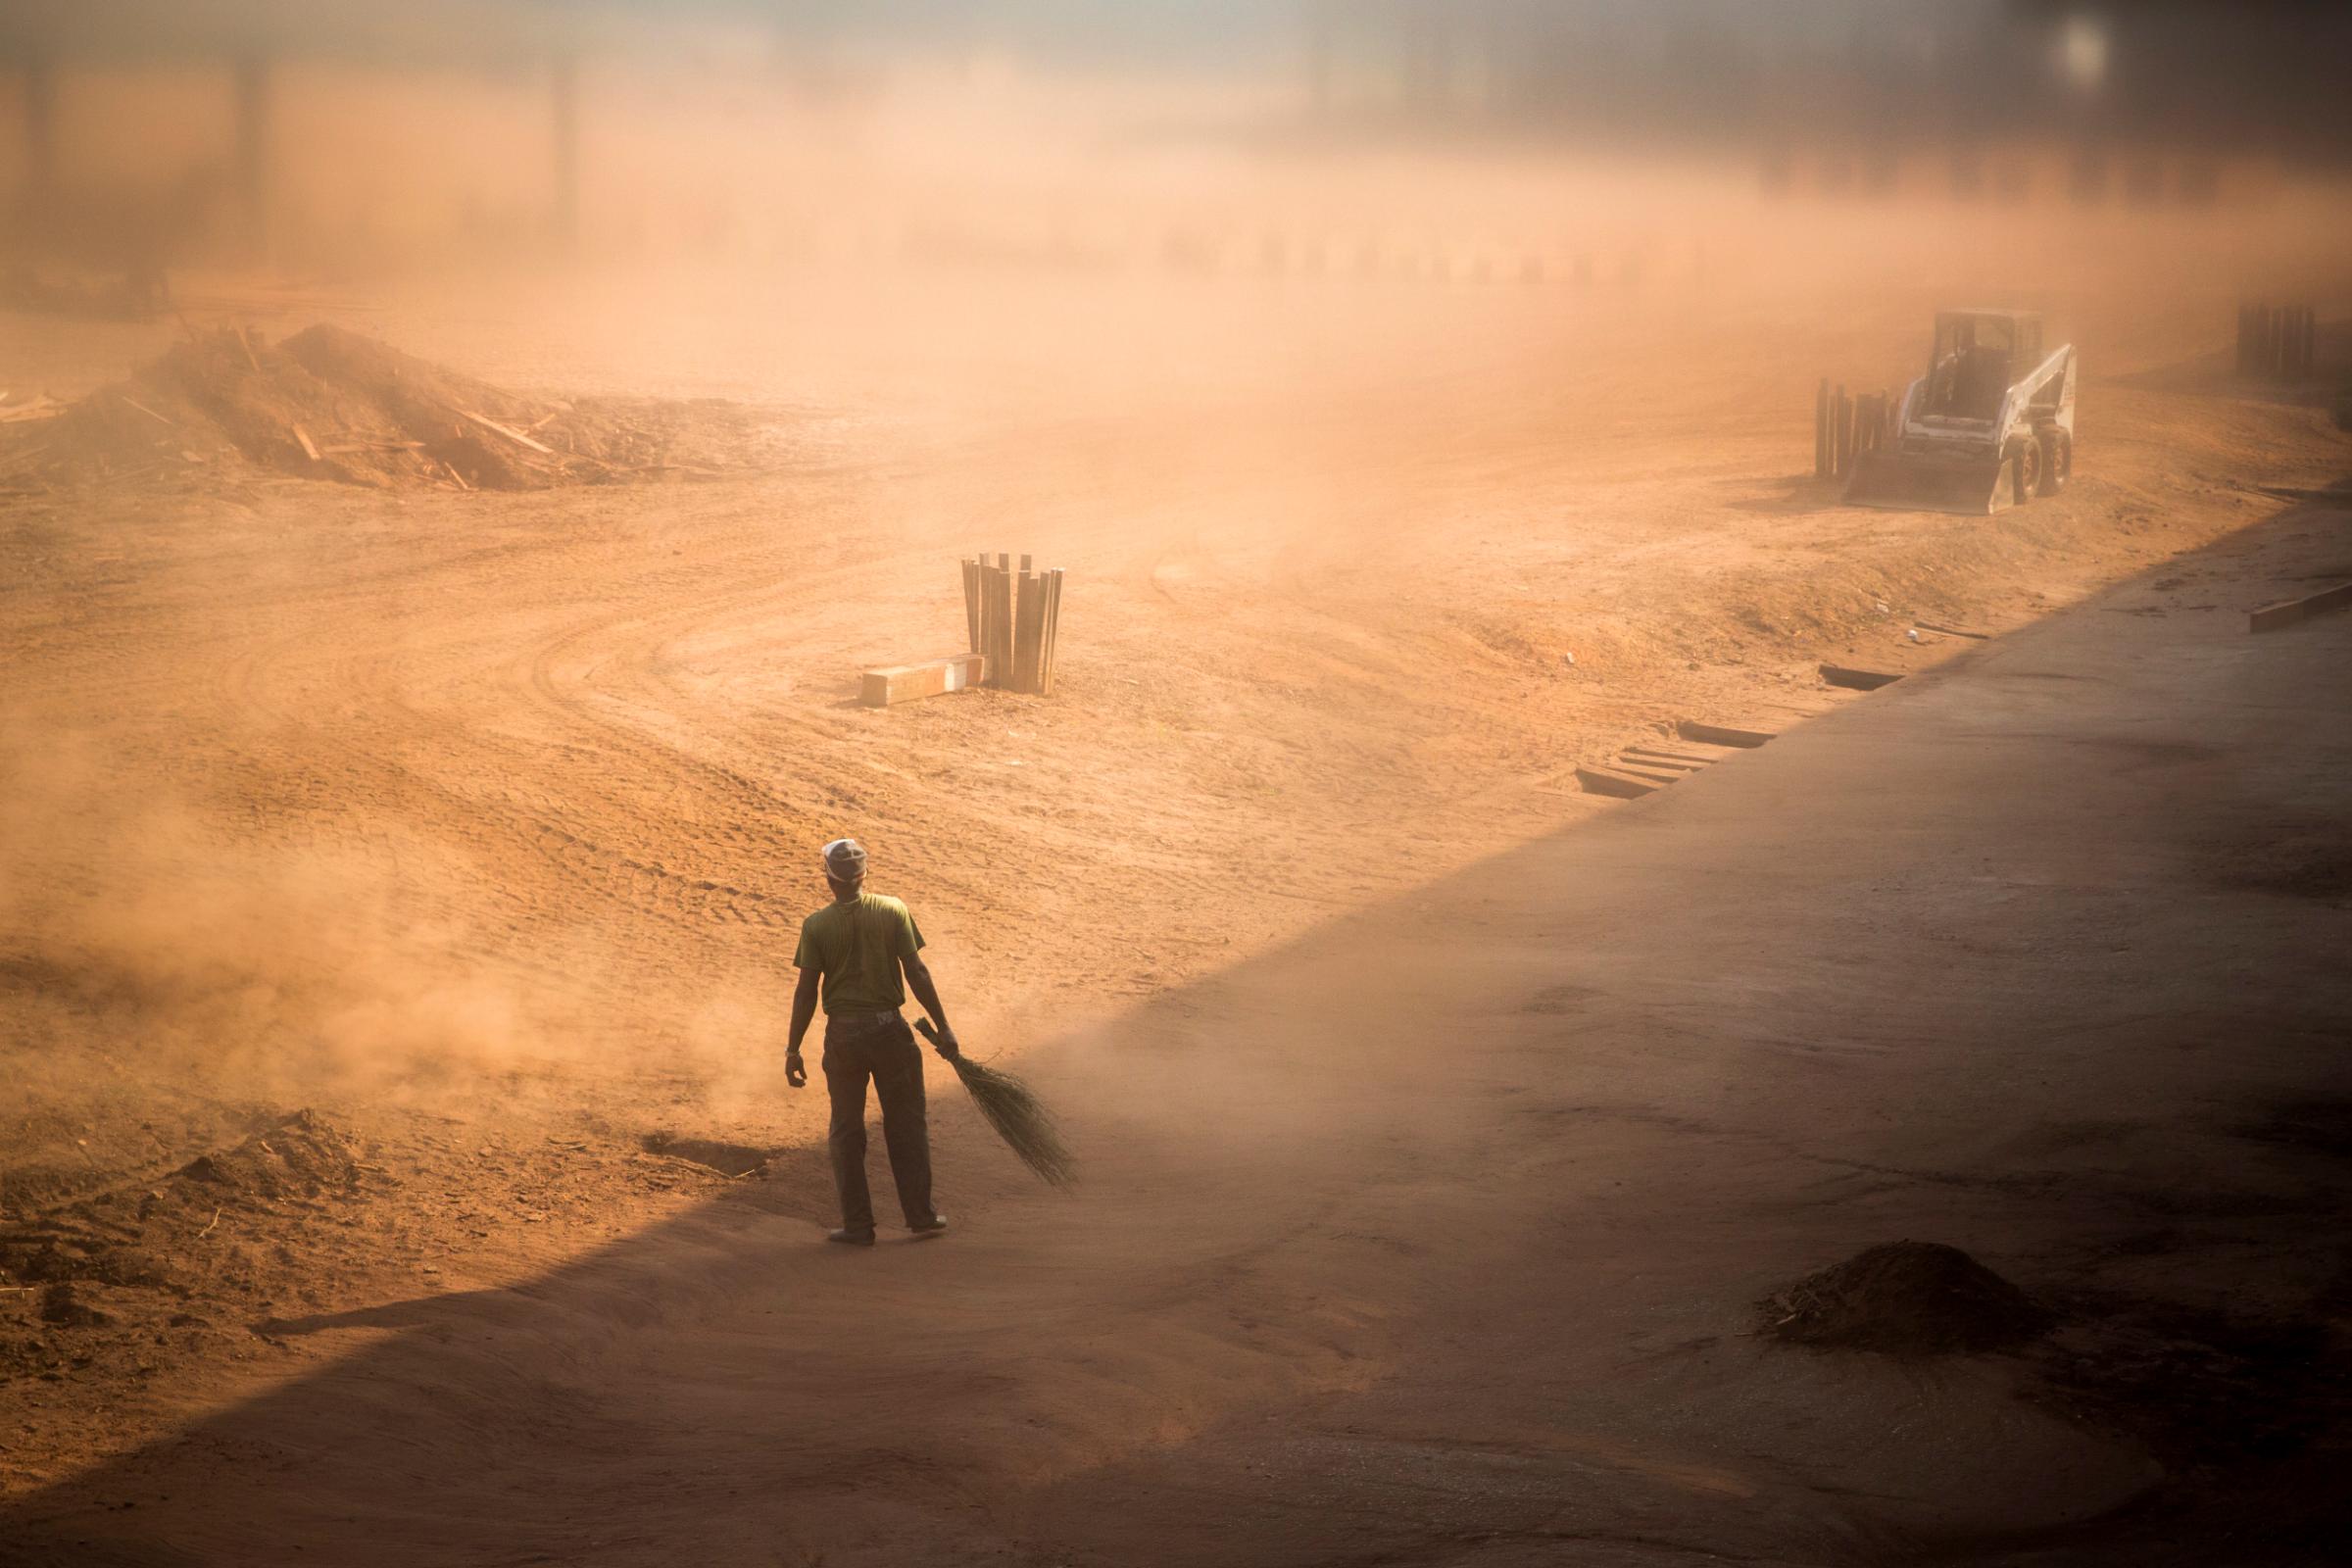 A worker sweeps wood dust at a timber factory near Mambelé, Central African Republic, Dec. 11, 2015. According to a report released by Global Witness last July, foreign logging companies paid millions of euros to Muslim rebels known as Séléka and mostly Christian militias known as antibalaka. Logging companies claim they are forced, like any other companies in the country, to pay bribes for security against attacks. The sector employed approximately 4,000 people—and apparently supported 6,000 indirect jobs, a figure that is now in decline, according to the Minister of Forests.